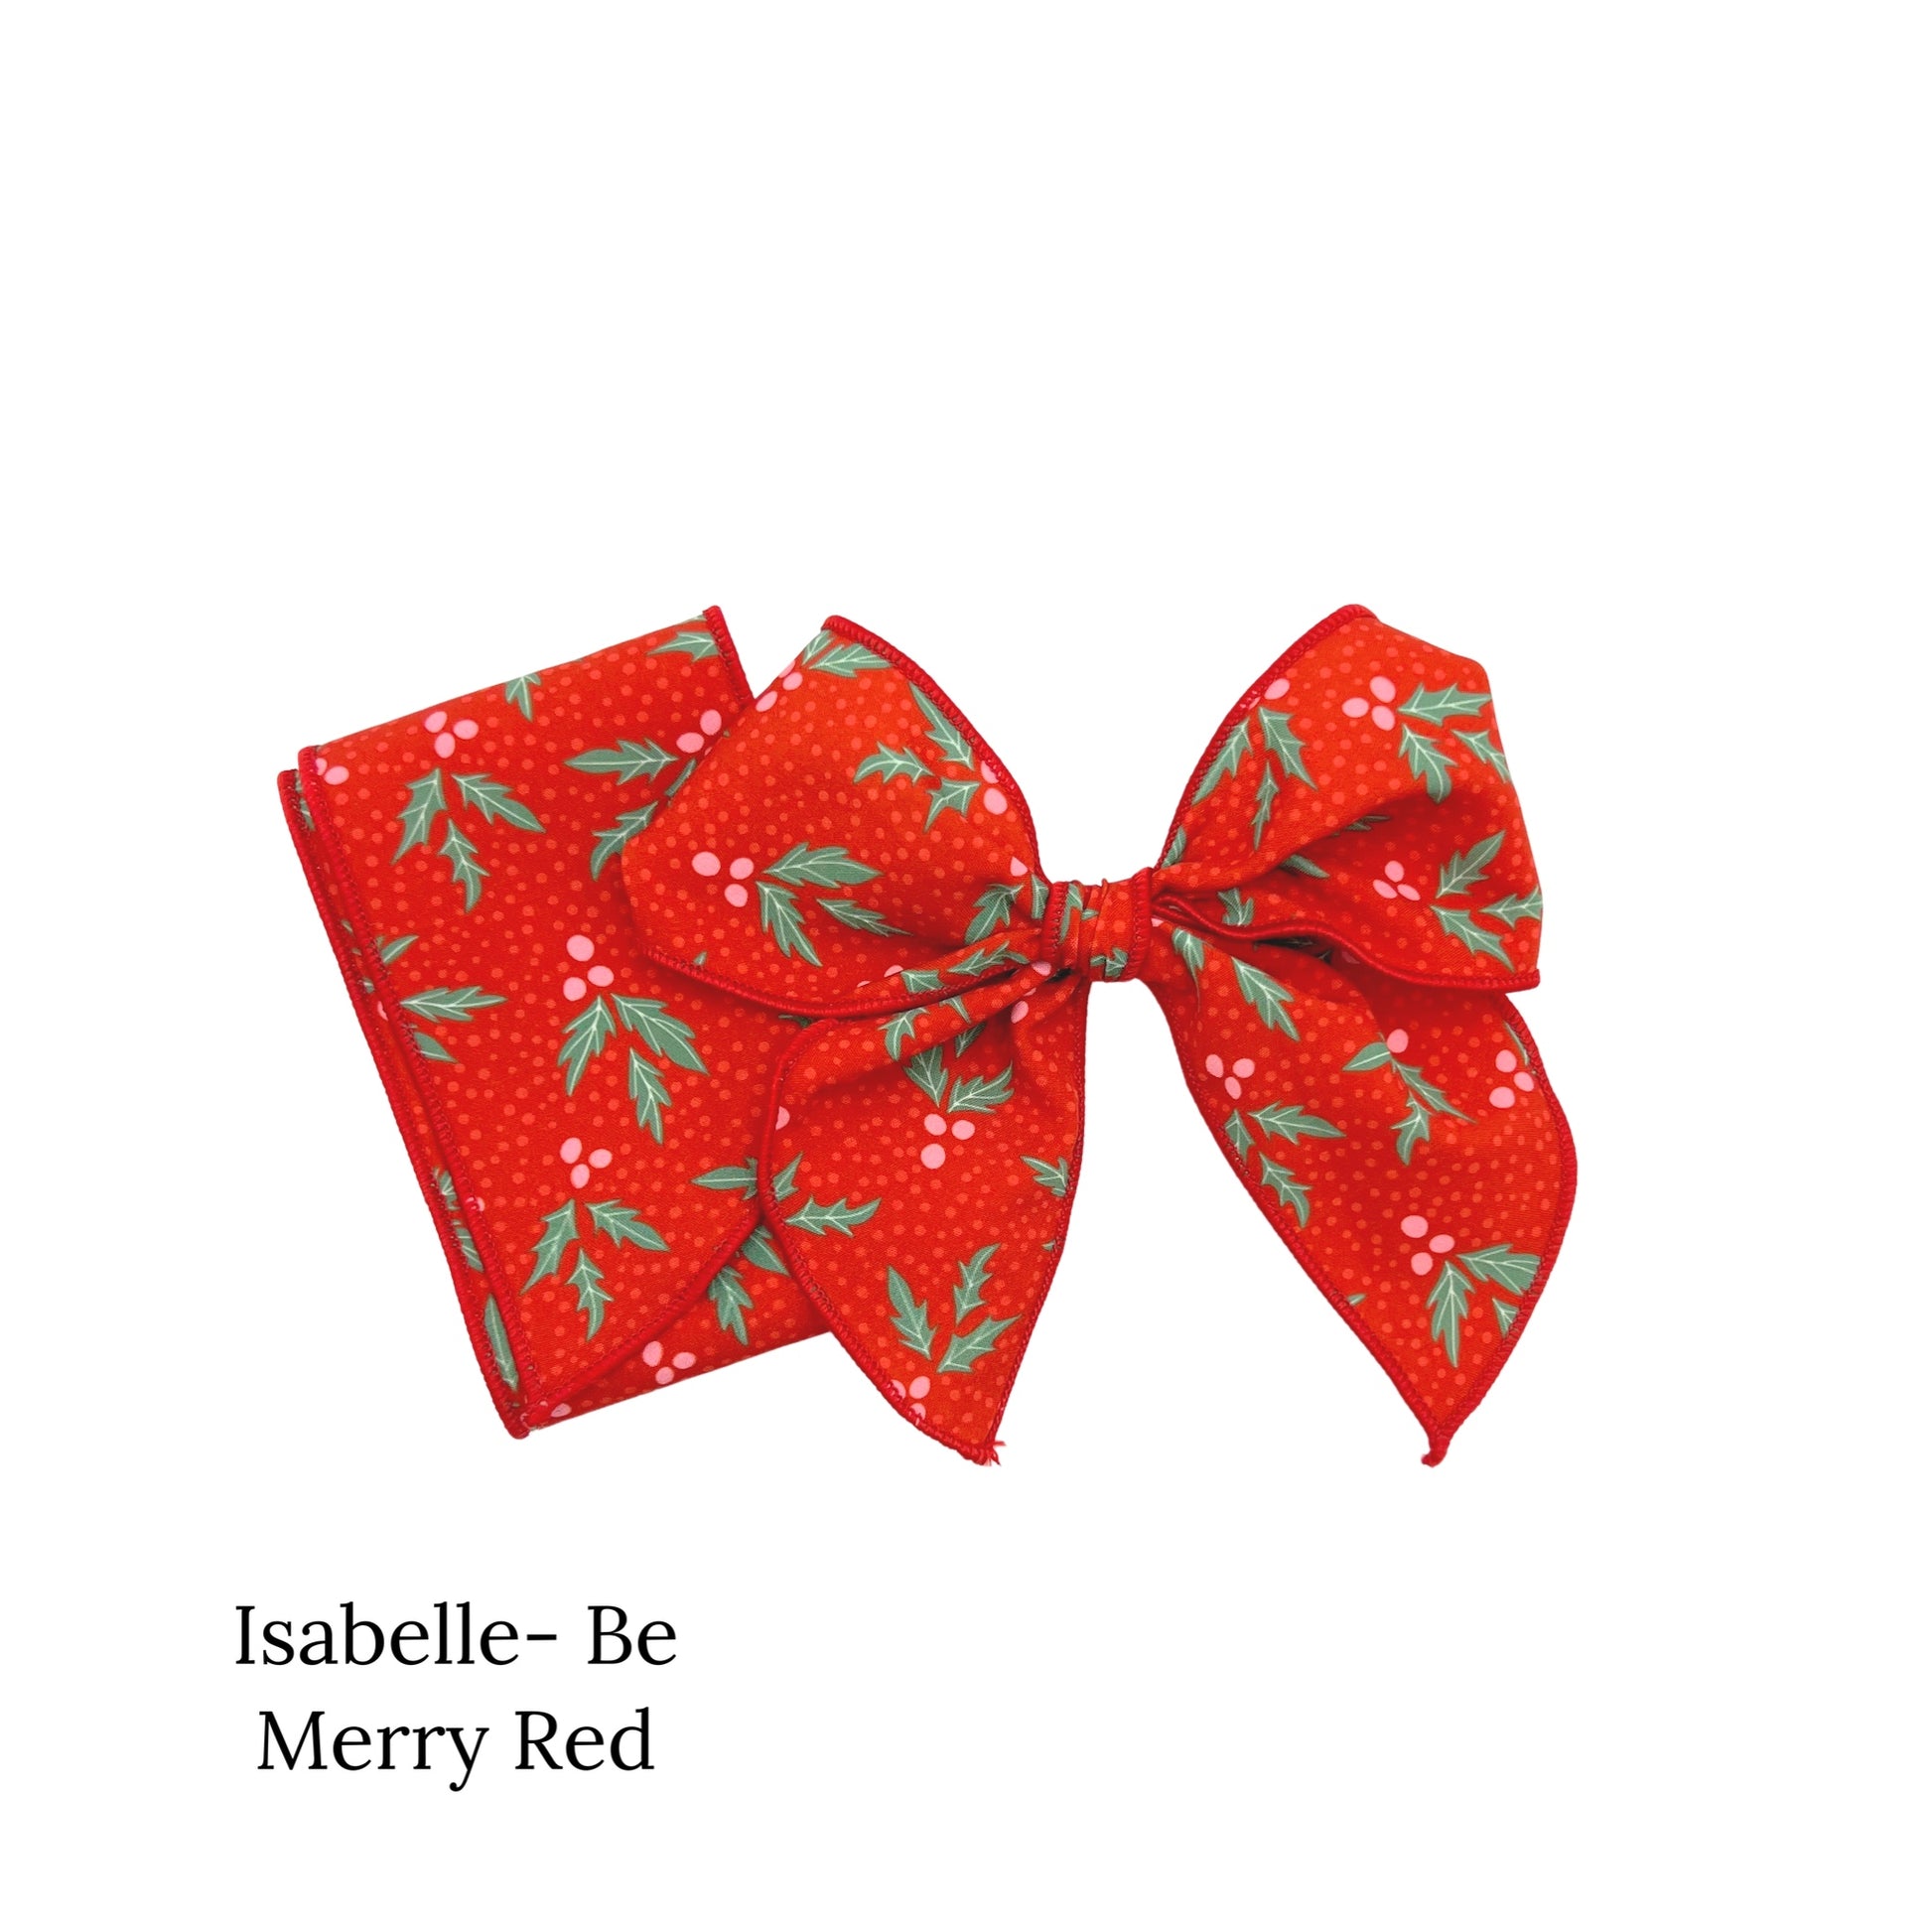 Red christmas bows with red berries and leaves